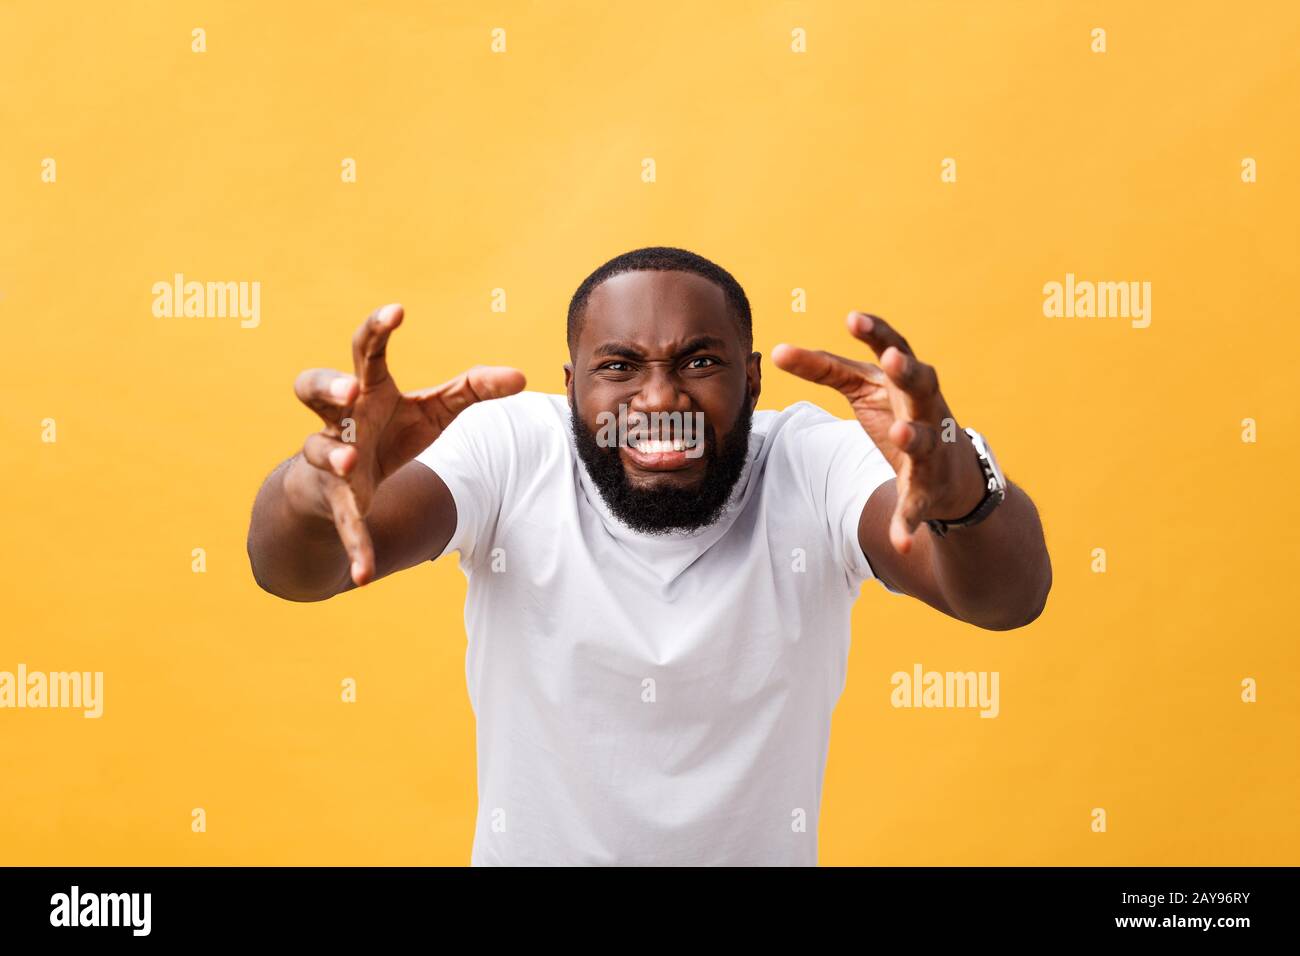 Portrait of african american man with hands raised in shock and disbelief. Isolated over yellow background. Stock Photo